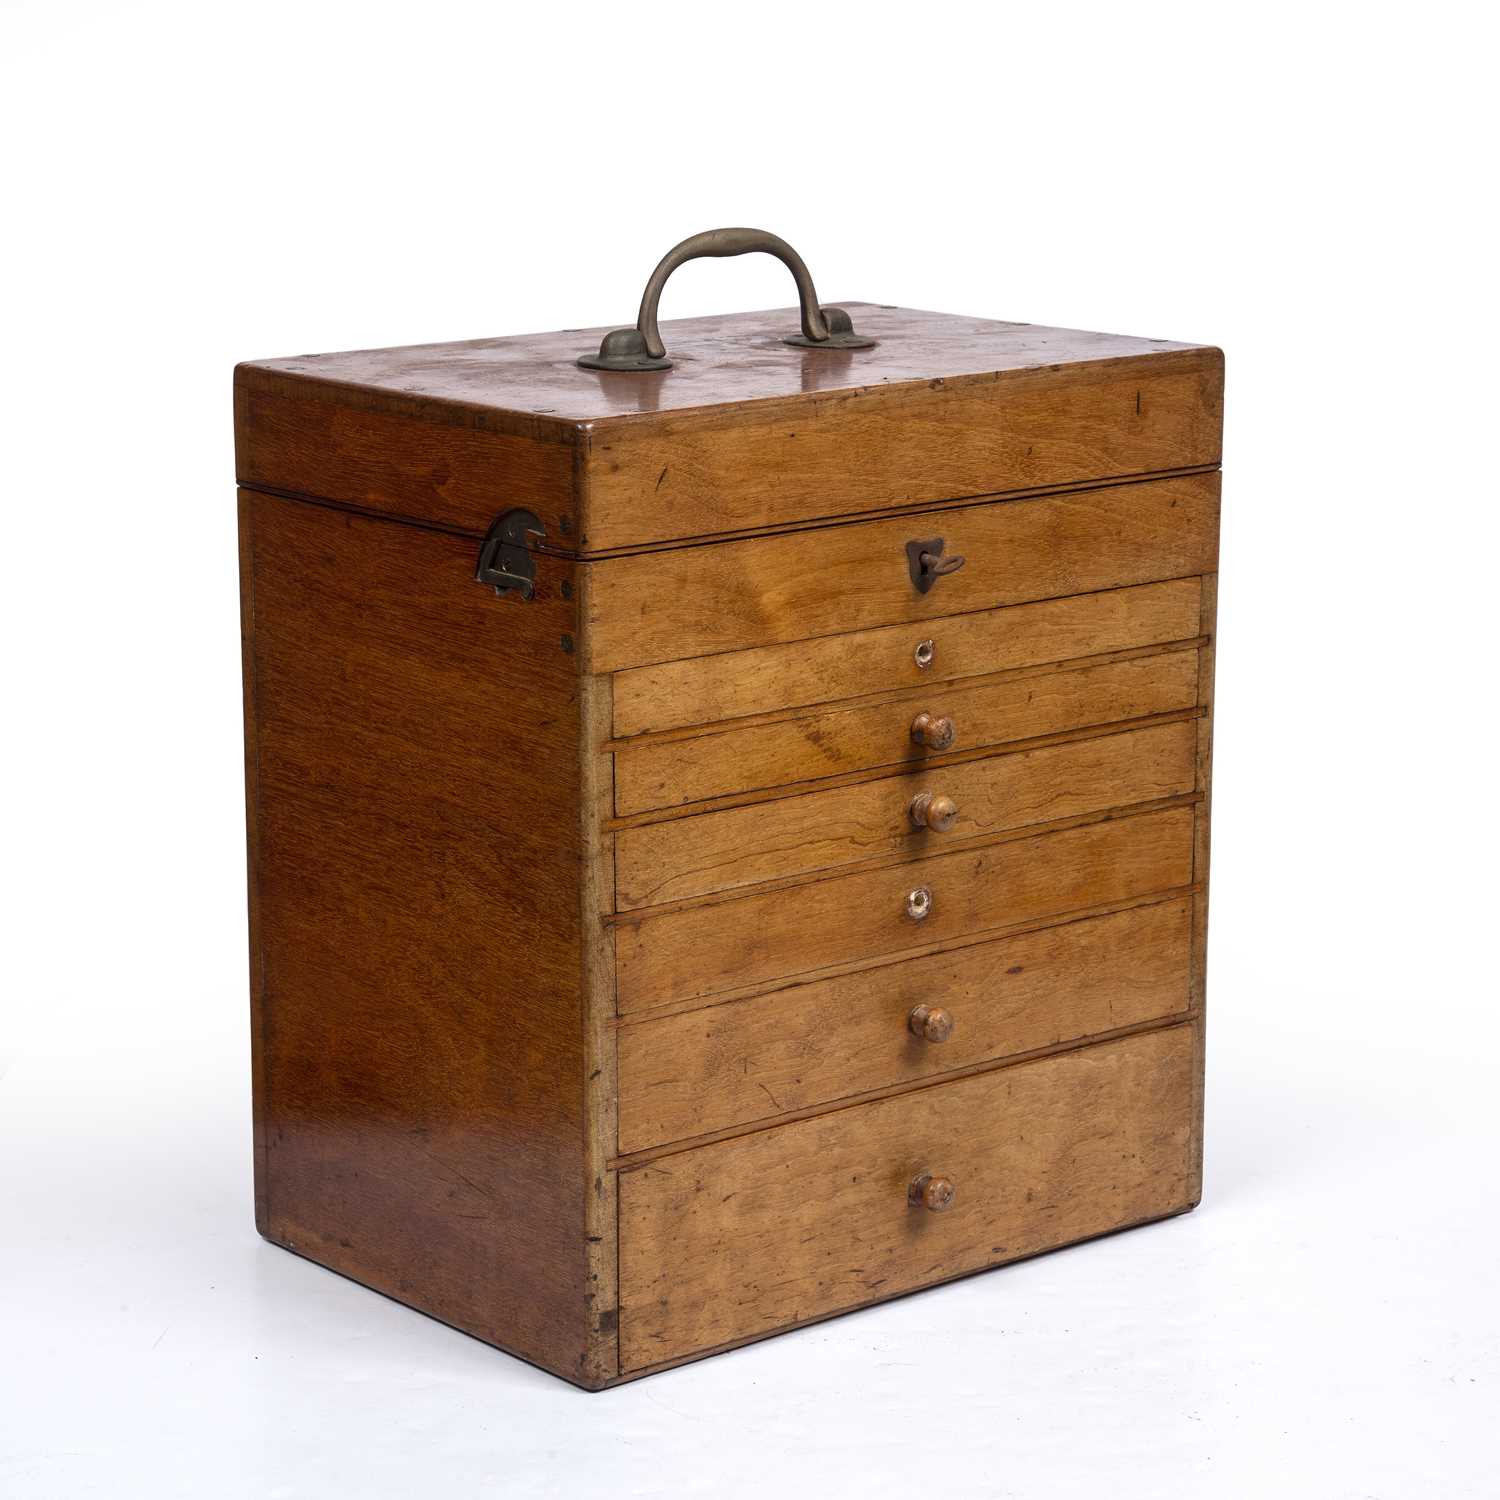 An early 20th century mahogany medical cabinet with a brass carrying handle, lifting top and six